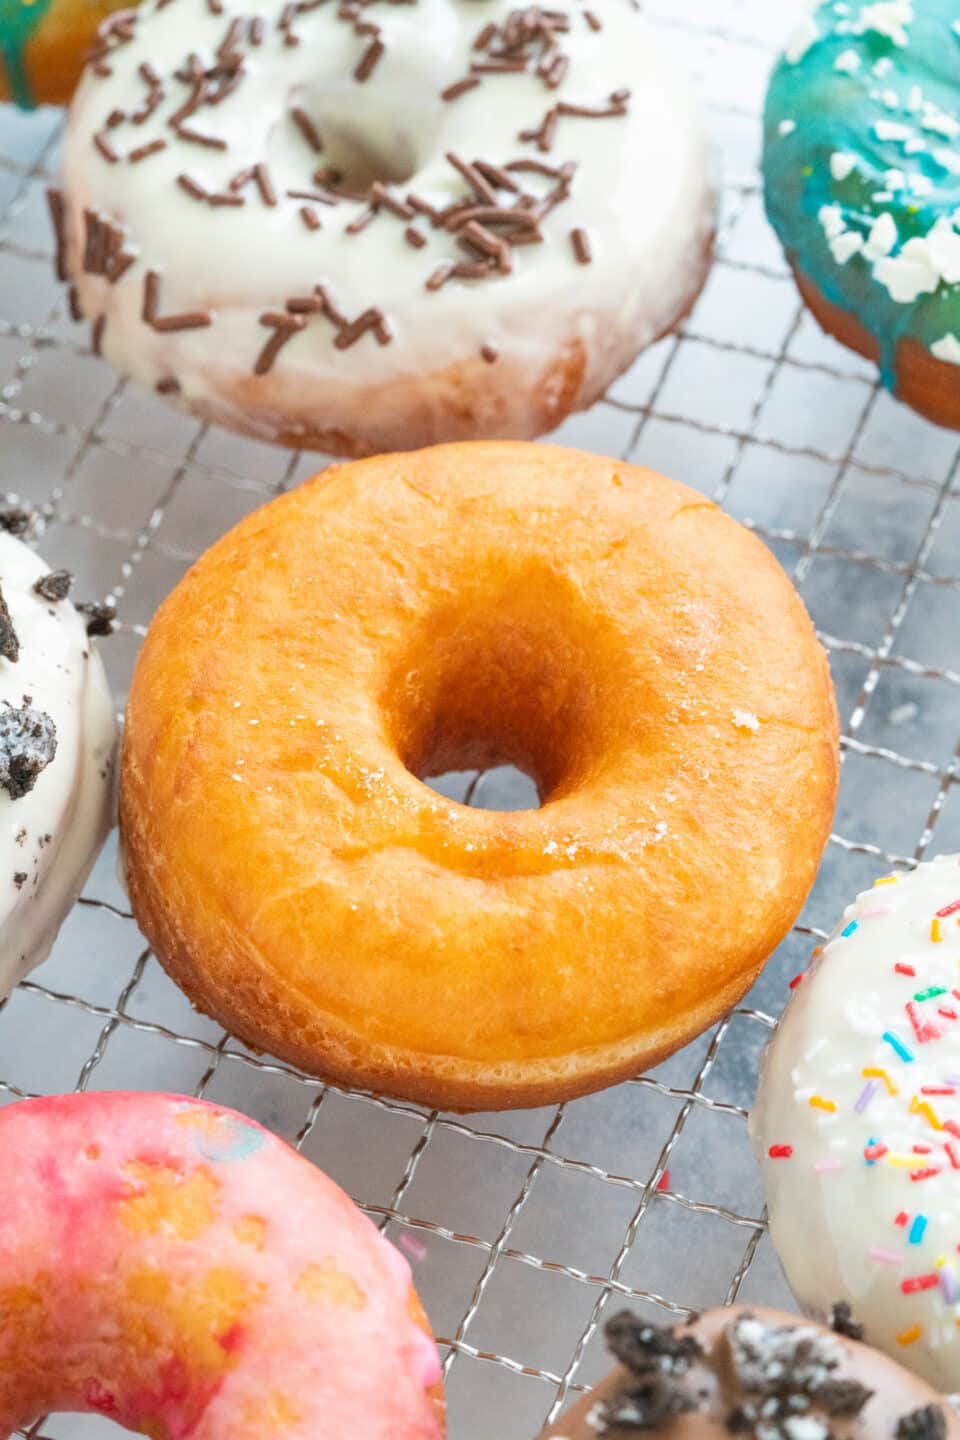 How to make Donuts without special equipment